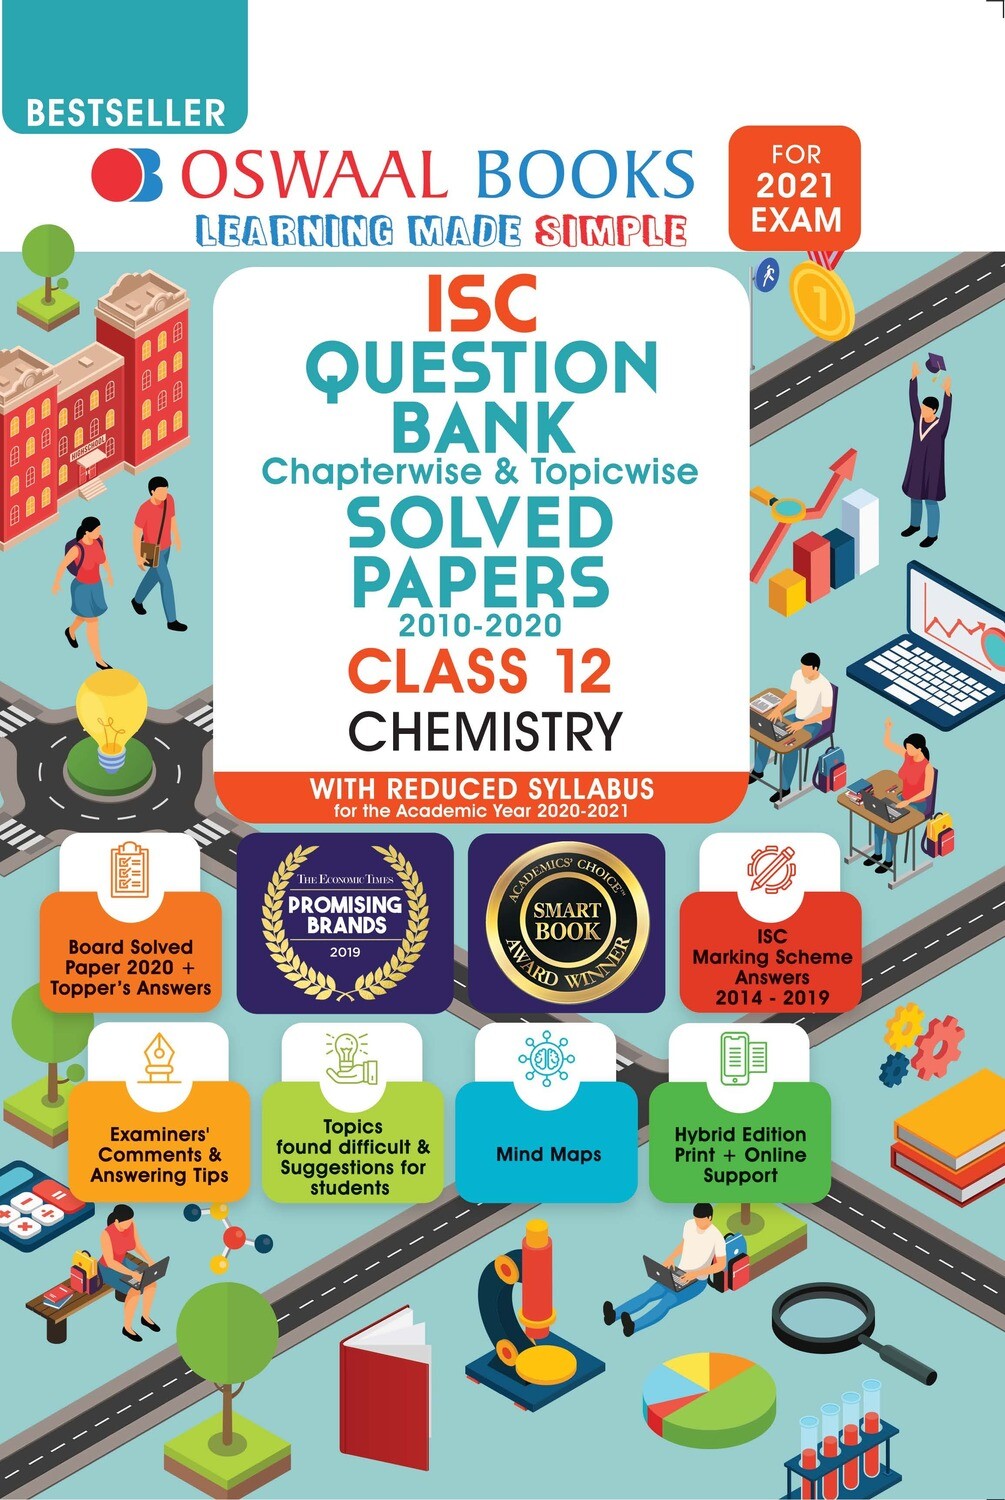 Buy e-book: Oswaal ISC Question Bank Chapterwise & Topicwise Solved Papers, Chemistry, Class 12 (Reduced Syllabu